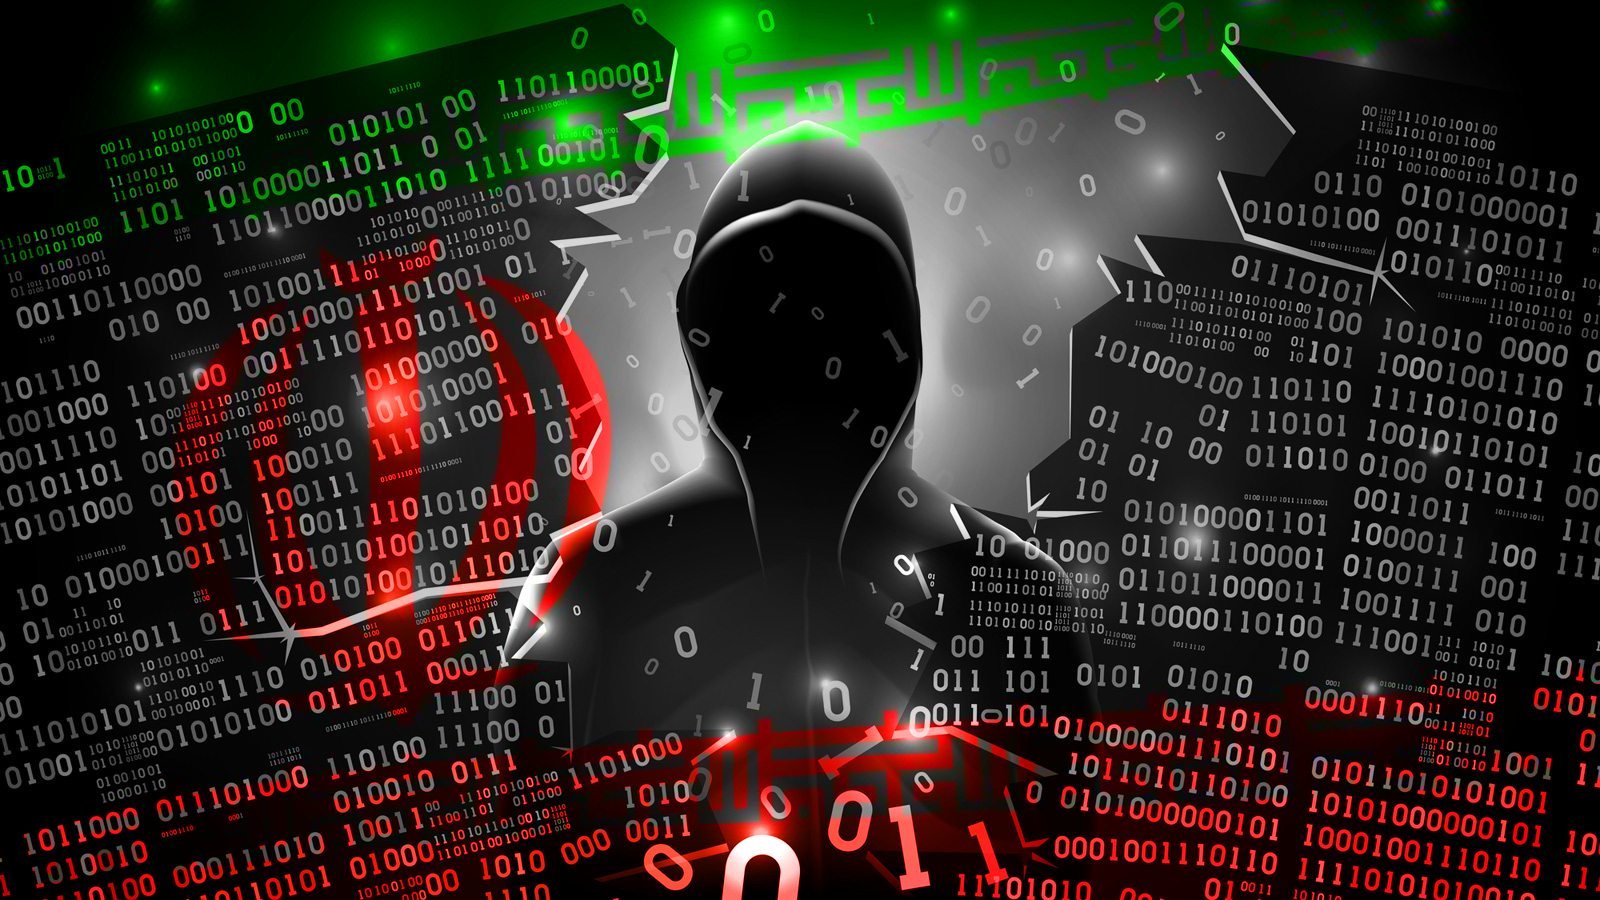 Iranian hackers launch malware attacks on Israel’s tech sector